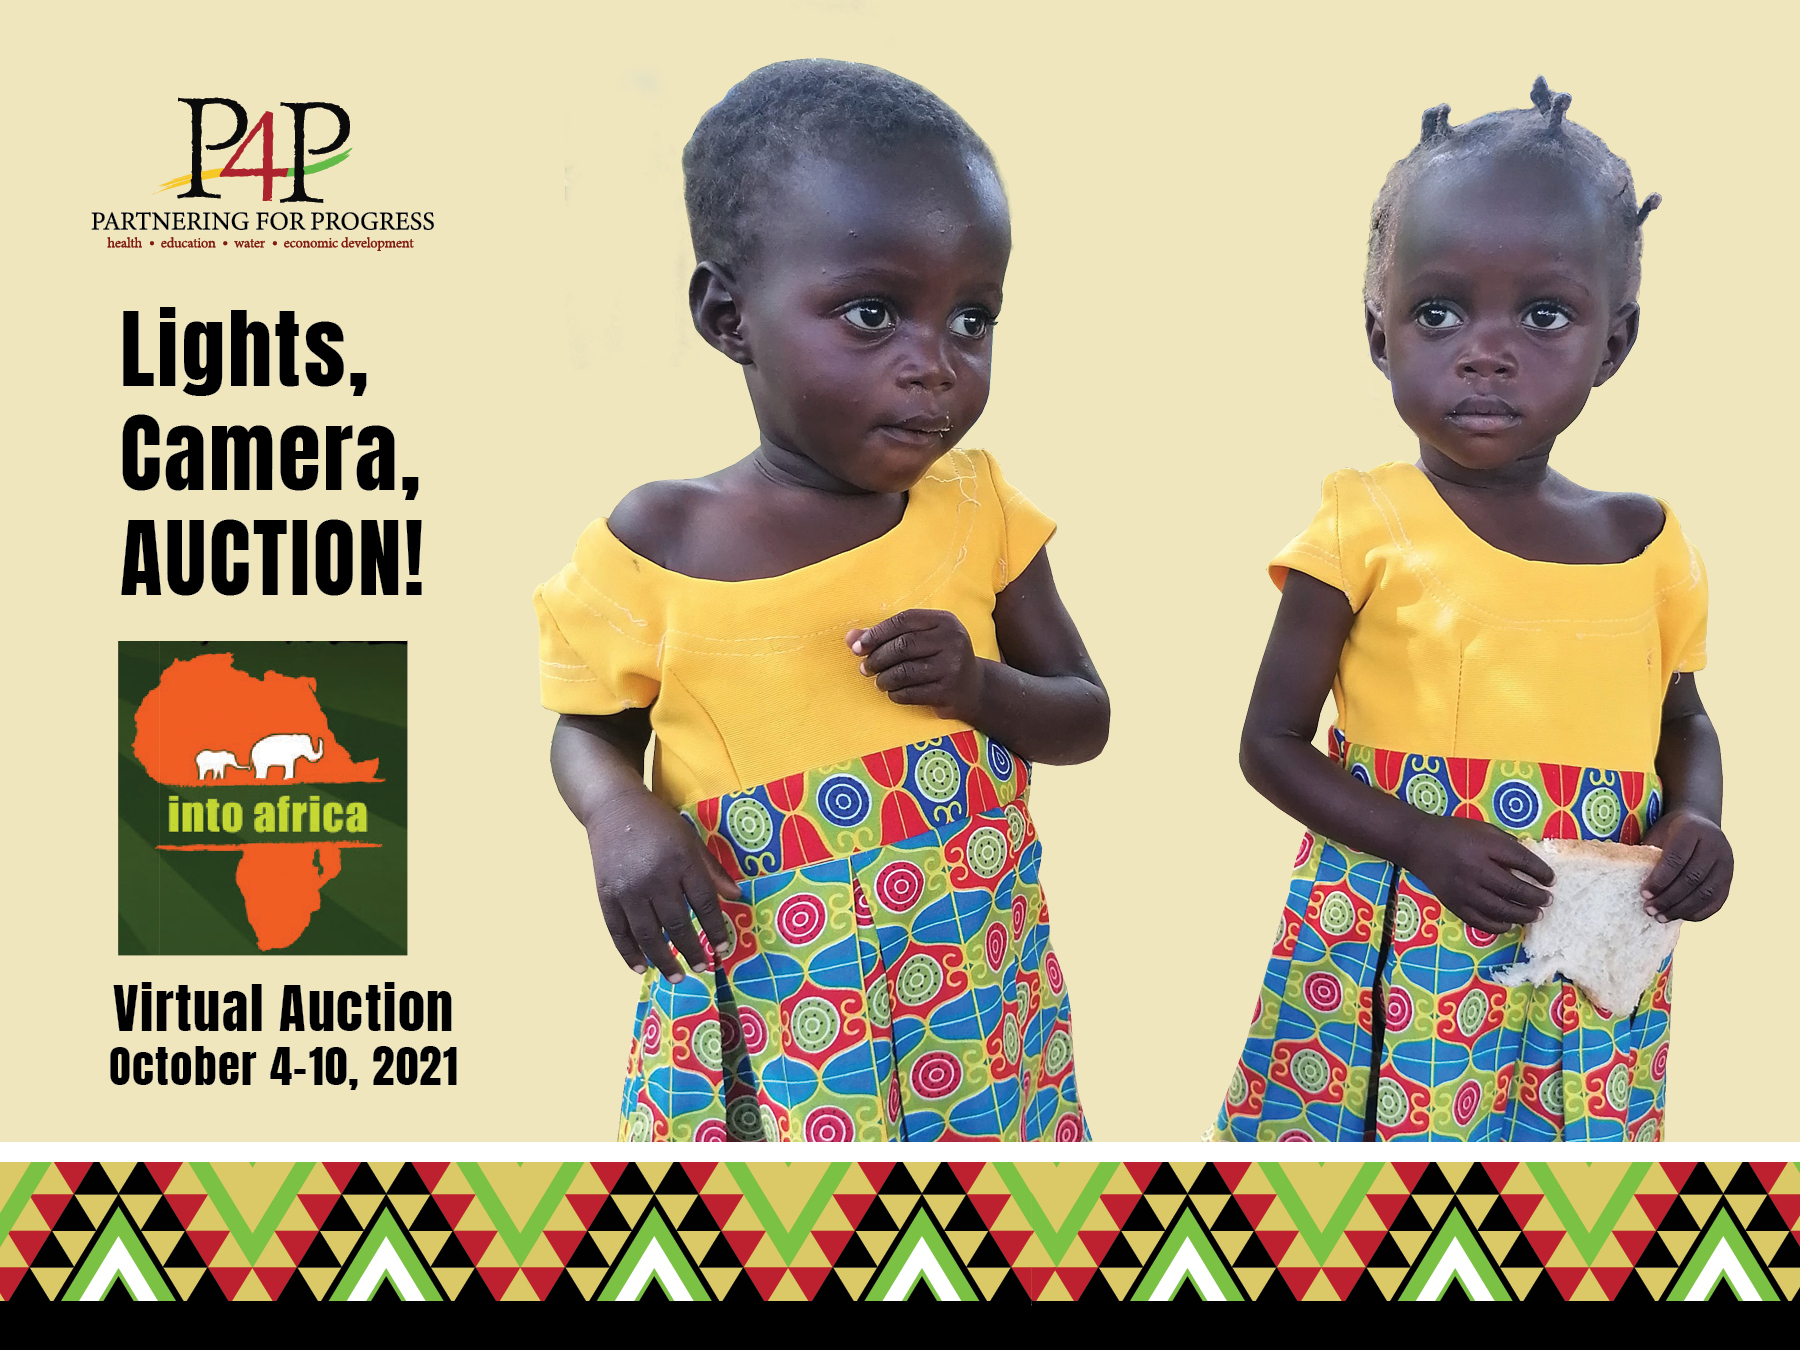 Silent online auction: Starts at 9:00am, October 4 and ends at 5:00pm, October 10Live streaming auction: October 7, 7:00pm – 8:00pm: Live streaming auction